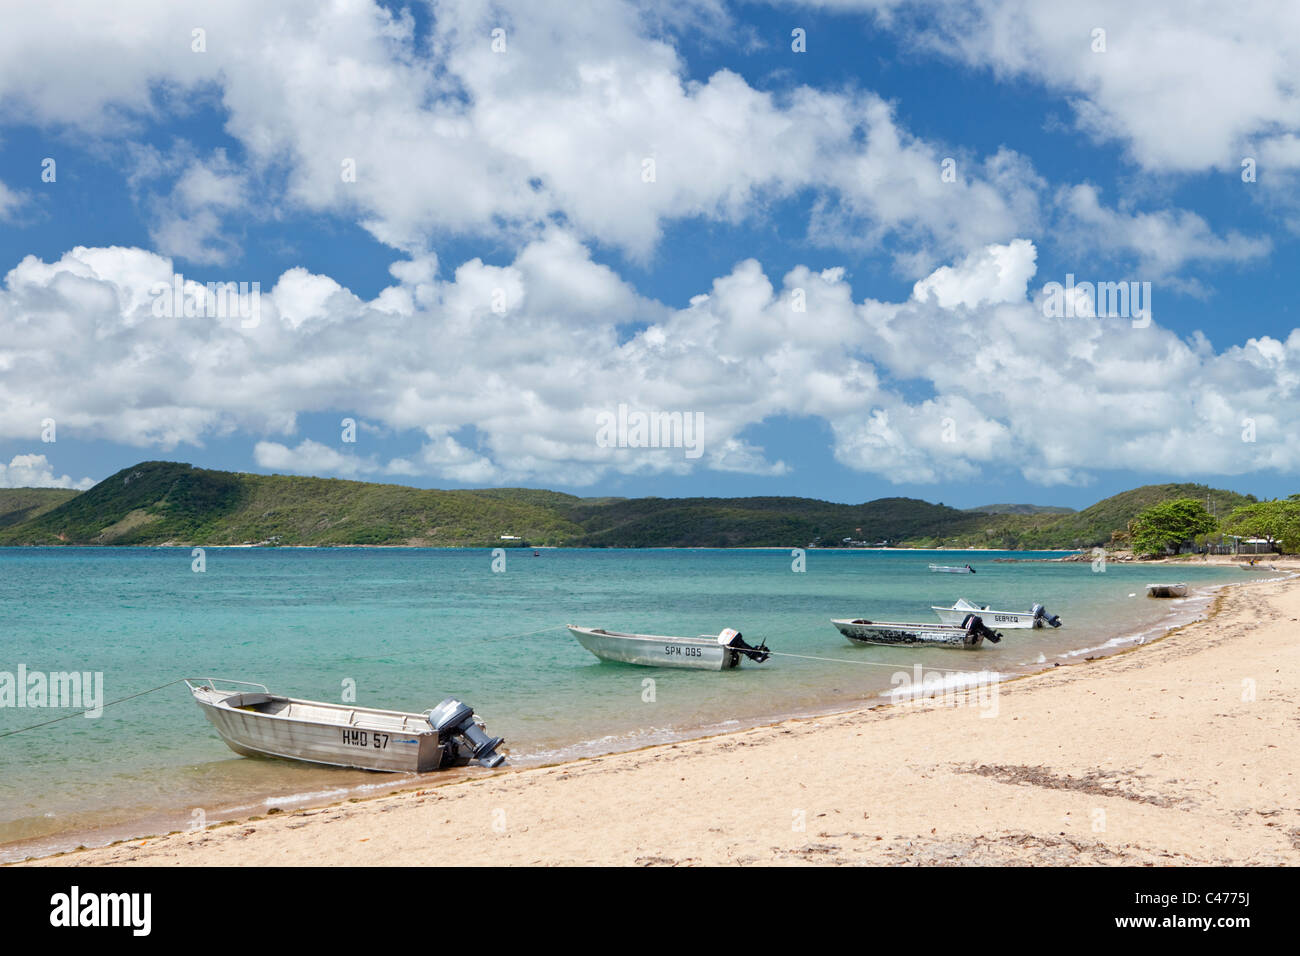 Boats moored at the beach. Thursday Island, Torres Strait Islands, Queensland, Australia Stock Photo